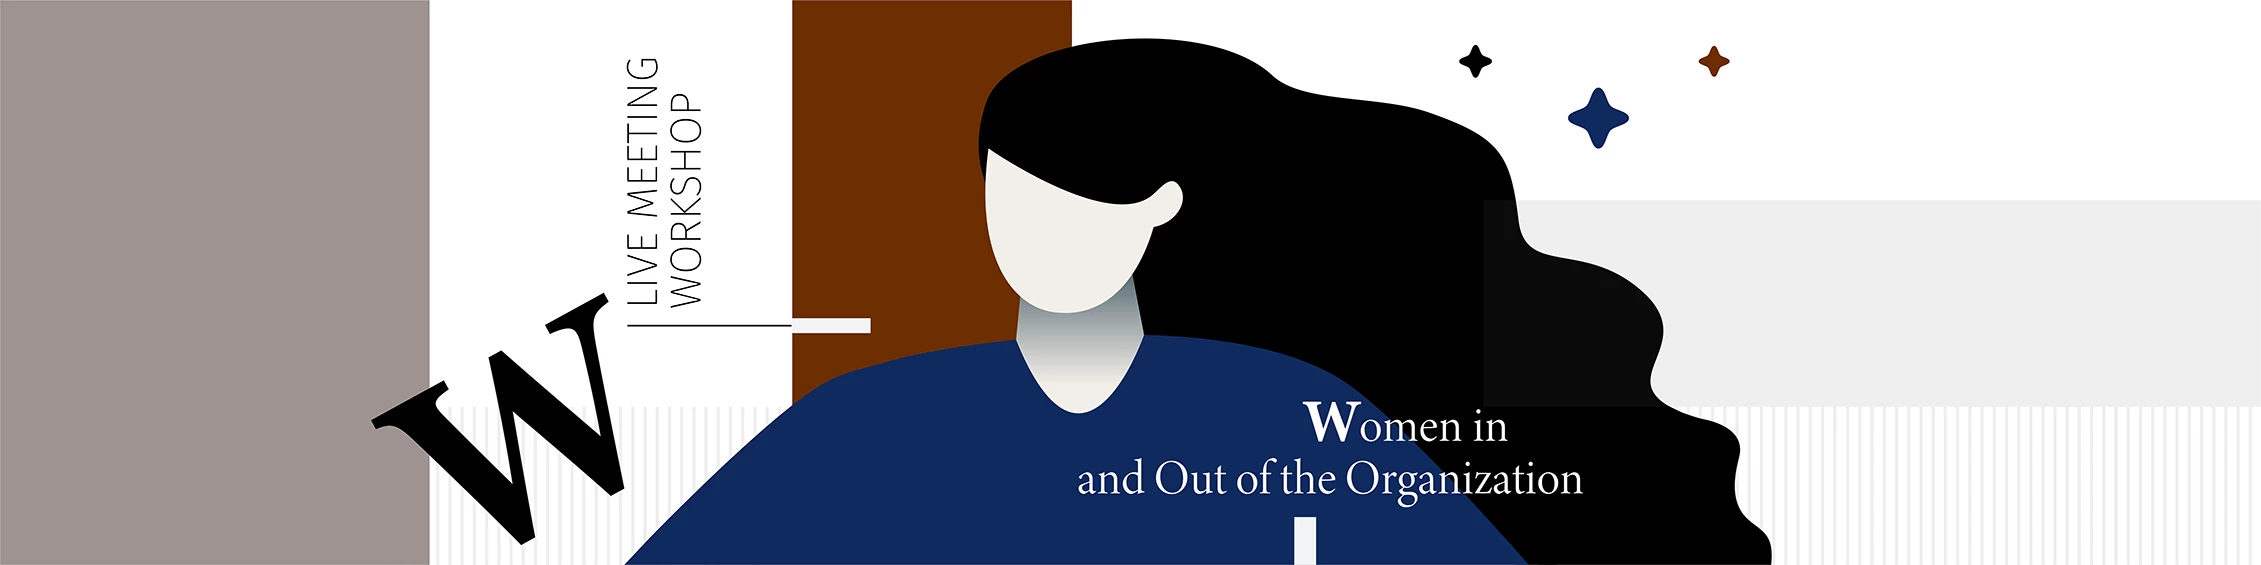 News: LIVE Meeting Workshop - Social and Economic Empowerment of Women in and Out of the Organization